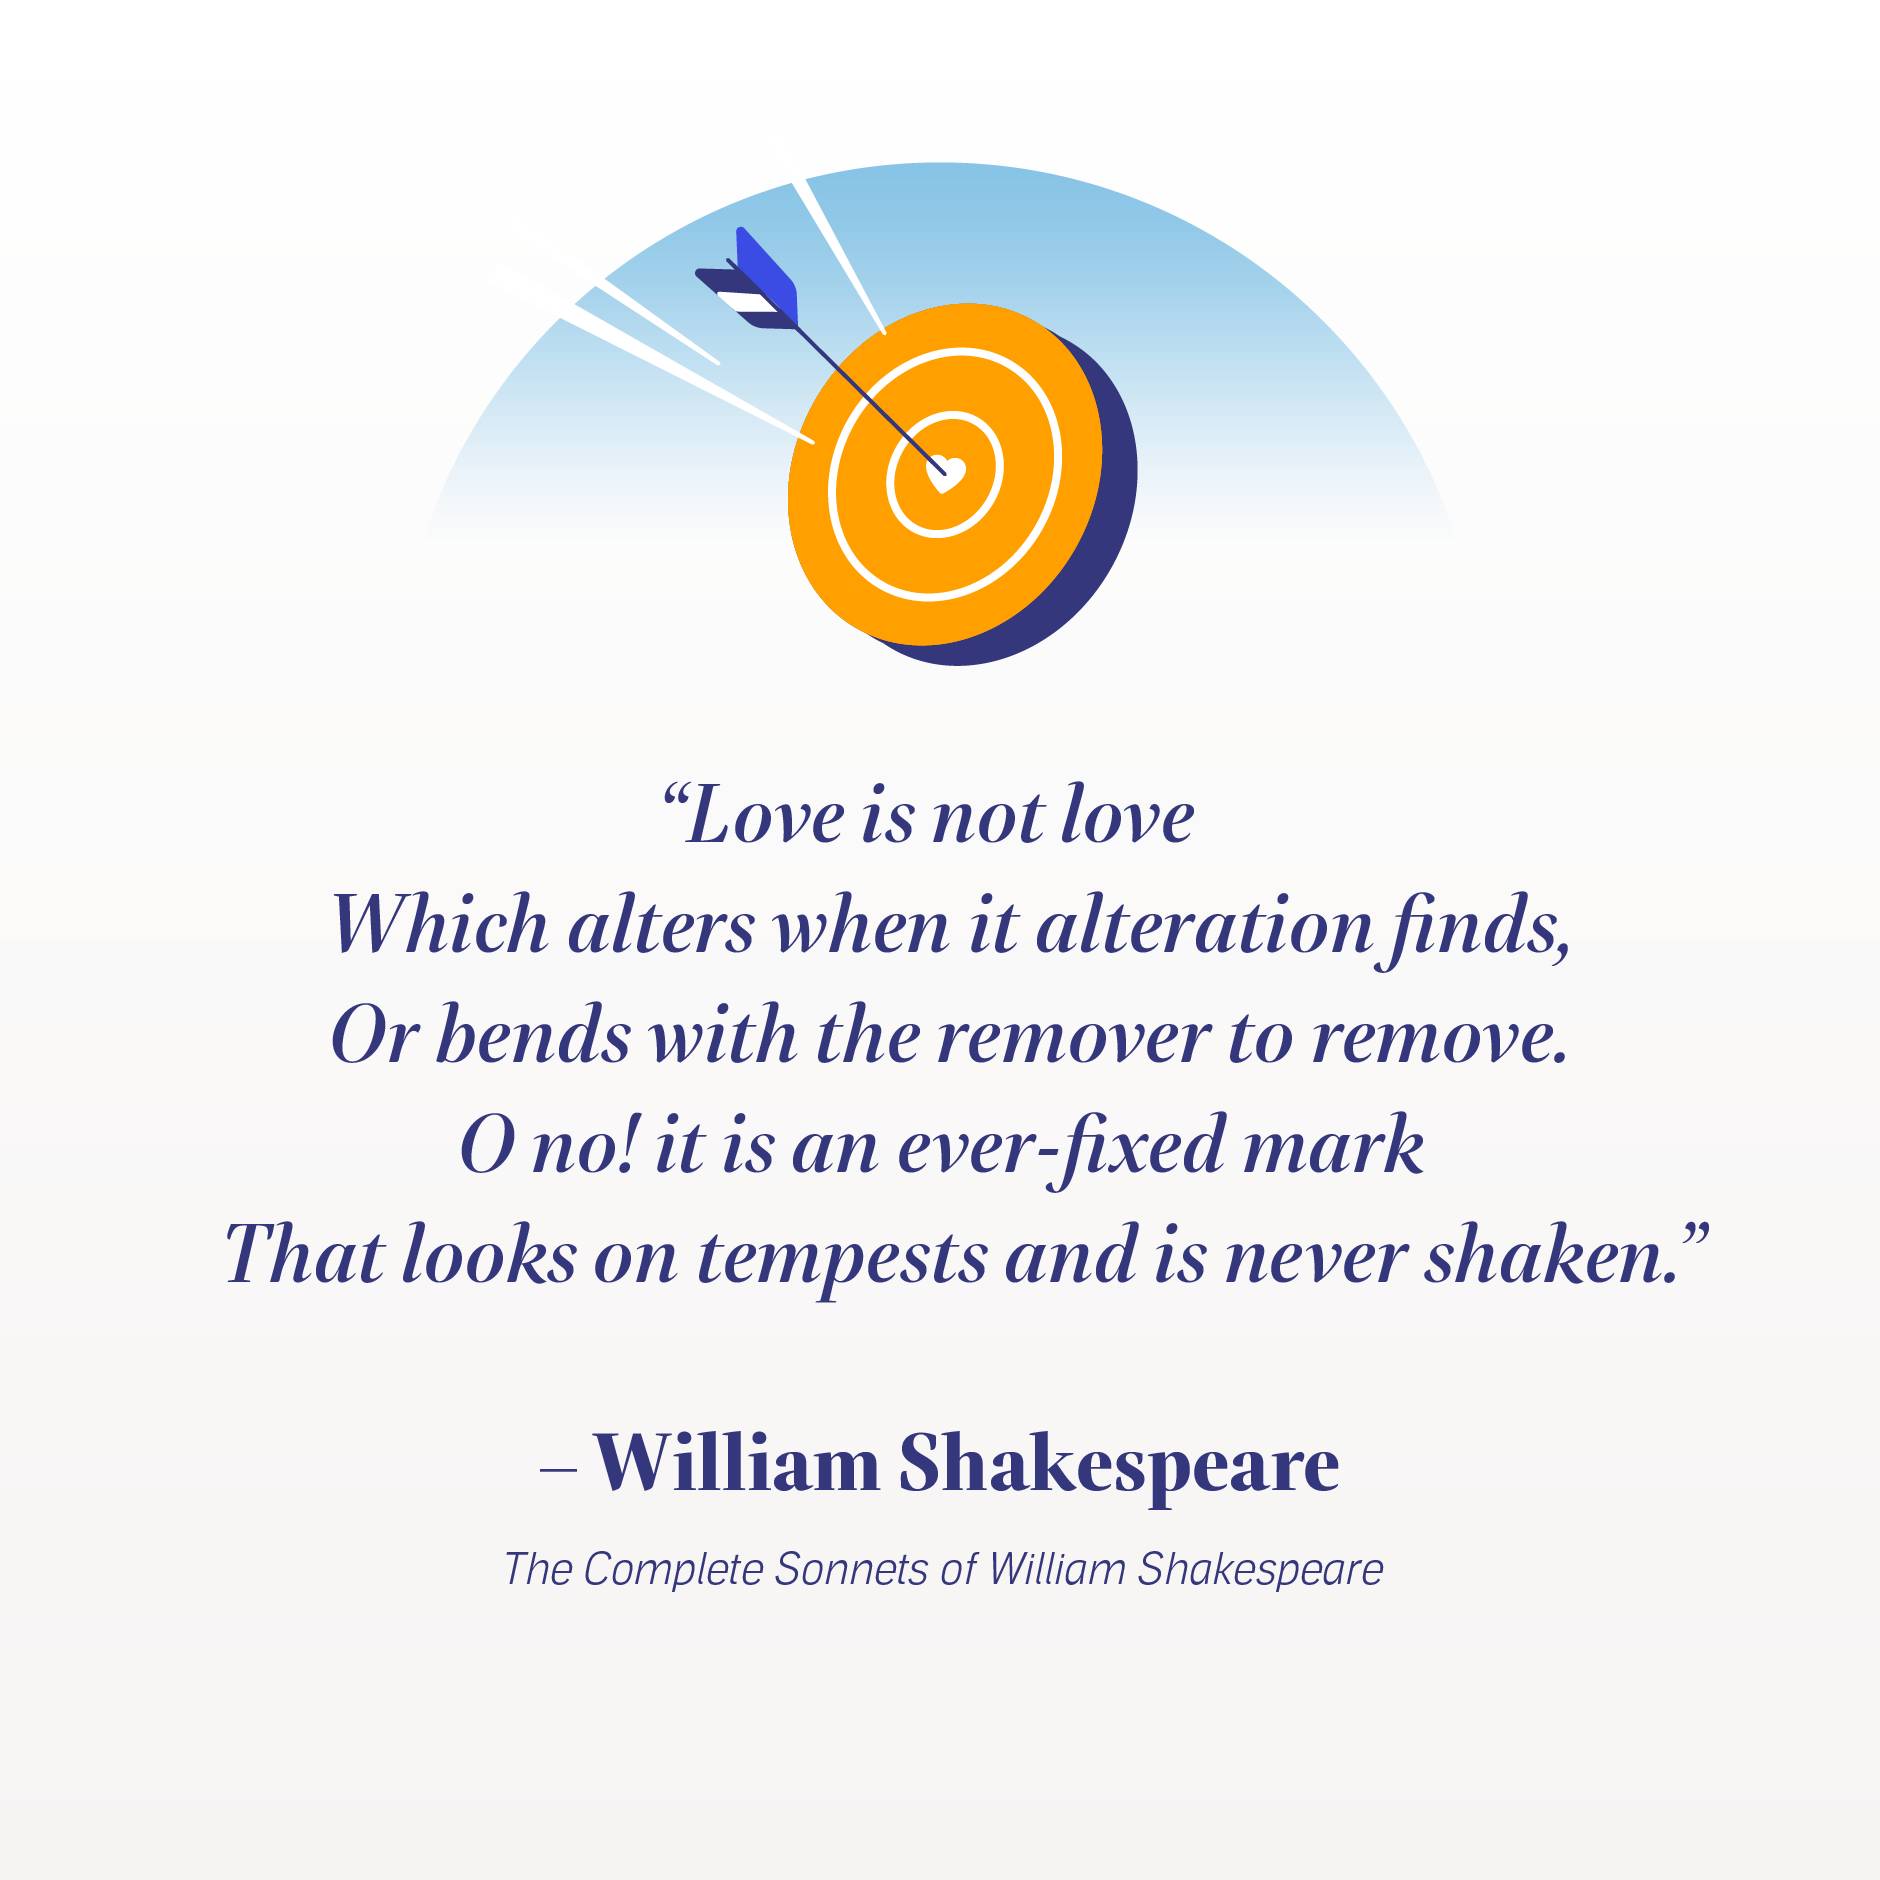 audible-shakespeare-quotes.4a-01